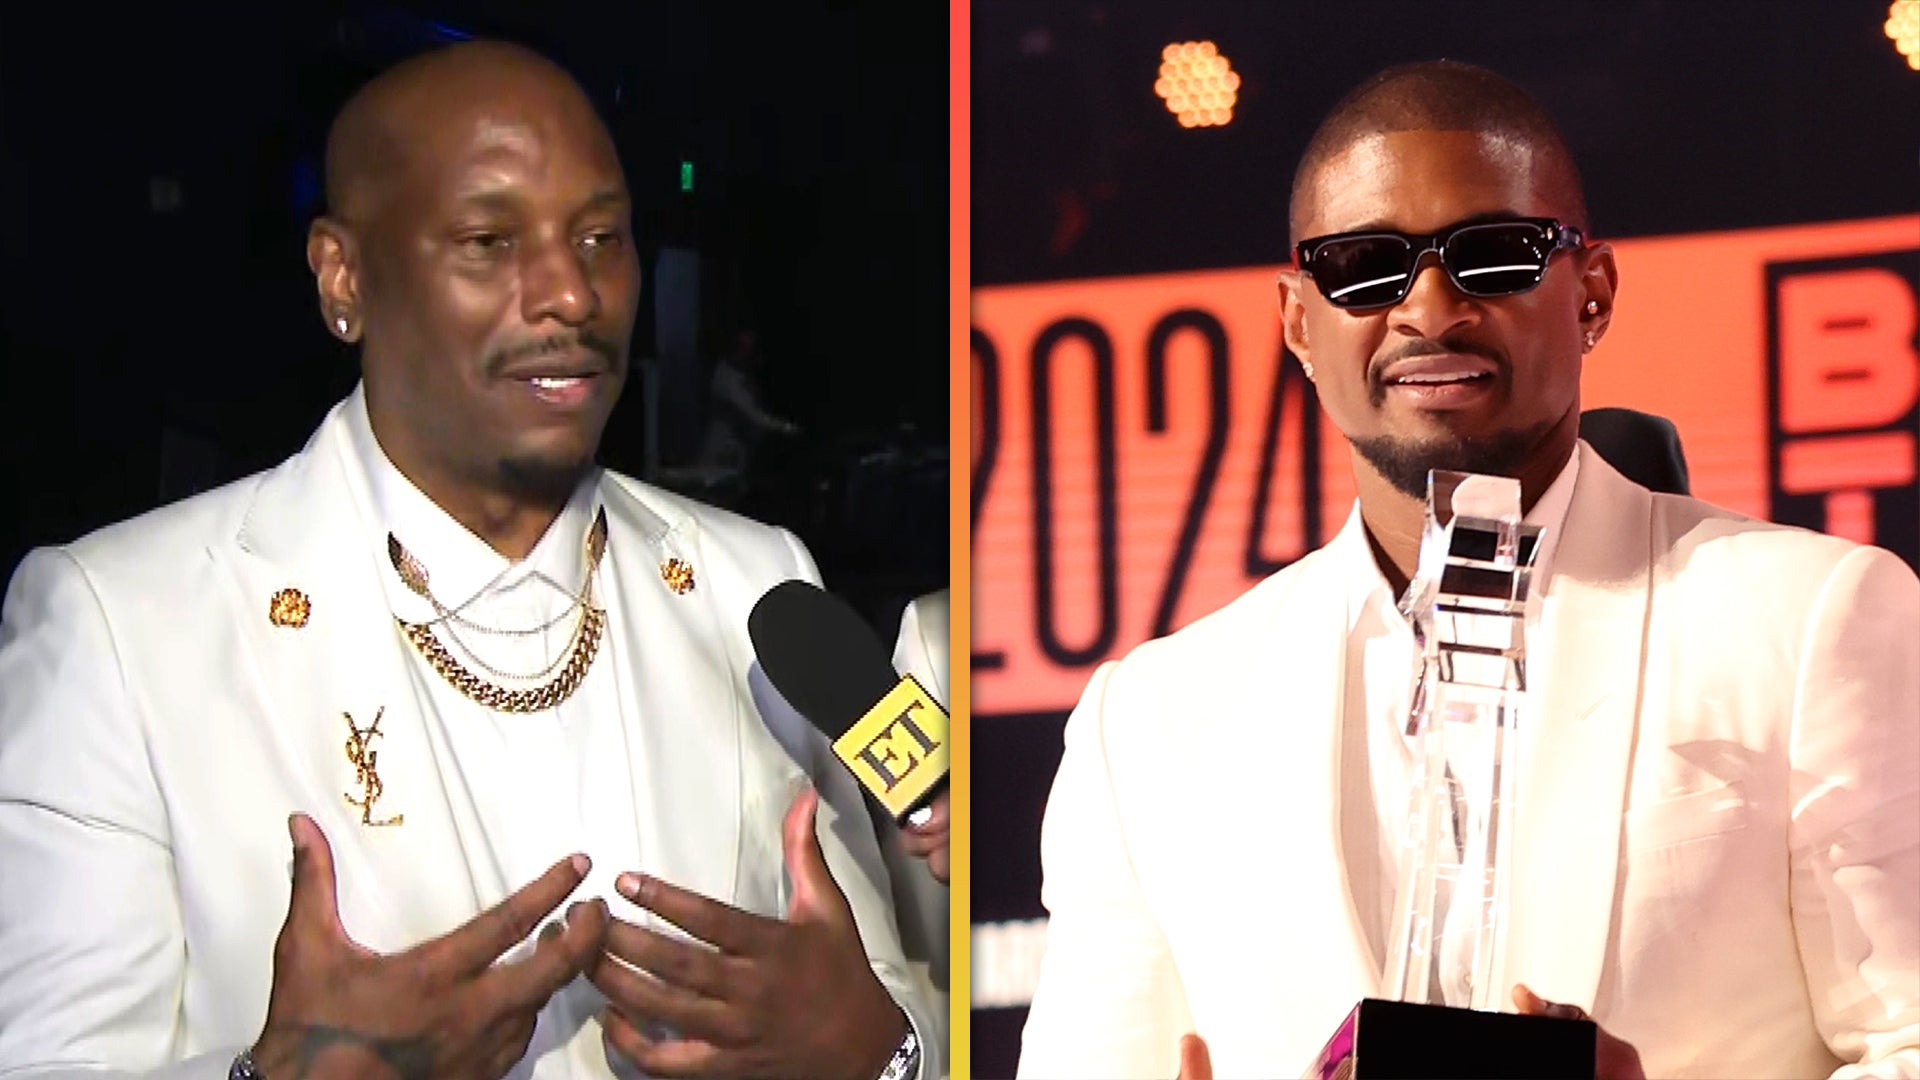 Tyrese Passionately Gives Usher His Flowers for Earning BET's Lifetime Achievement Award (Exclusive)